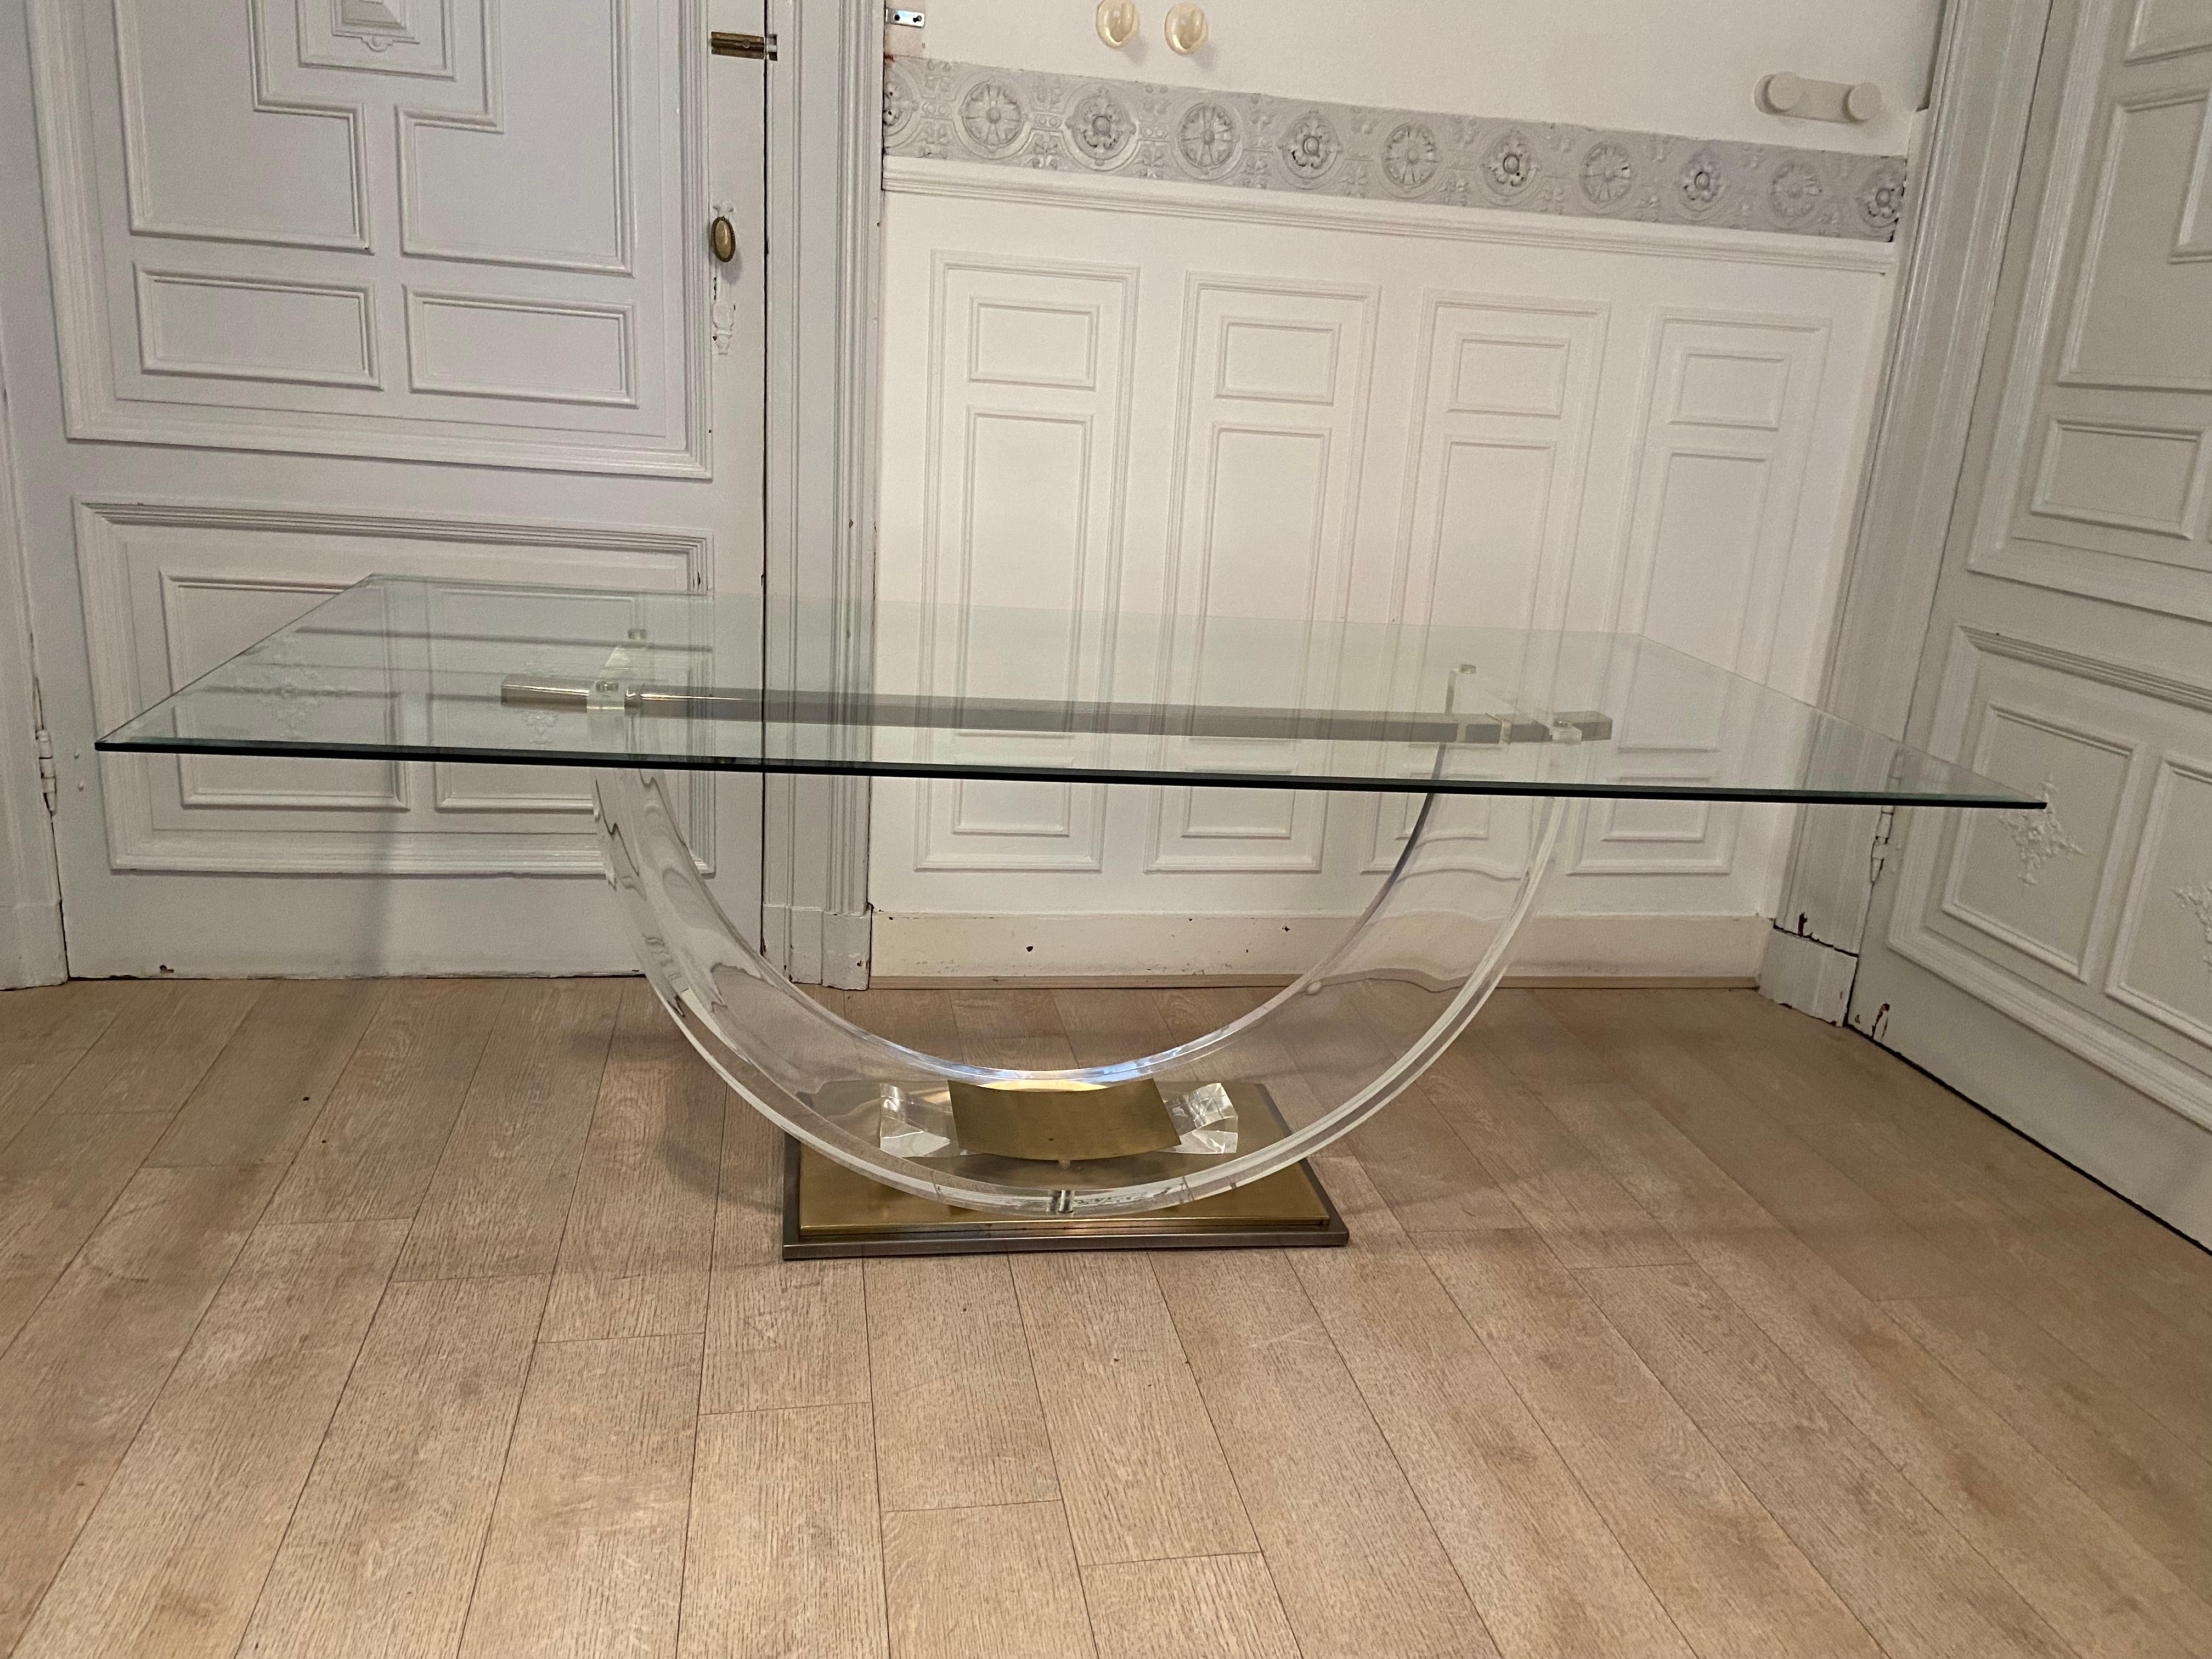 Elegant dining room table designed by the American designer charles hollis jones for the belgo chrom belgian manufacturer in the 70s. Brass base, plexiglass foot and bevelled glass top. Excellent vintage condition.